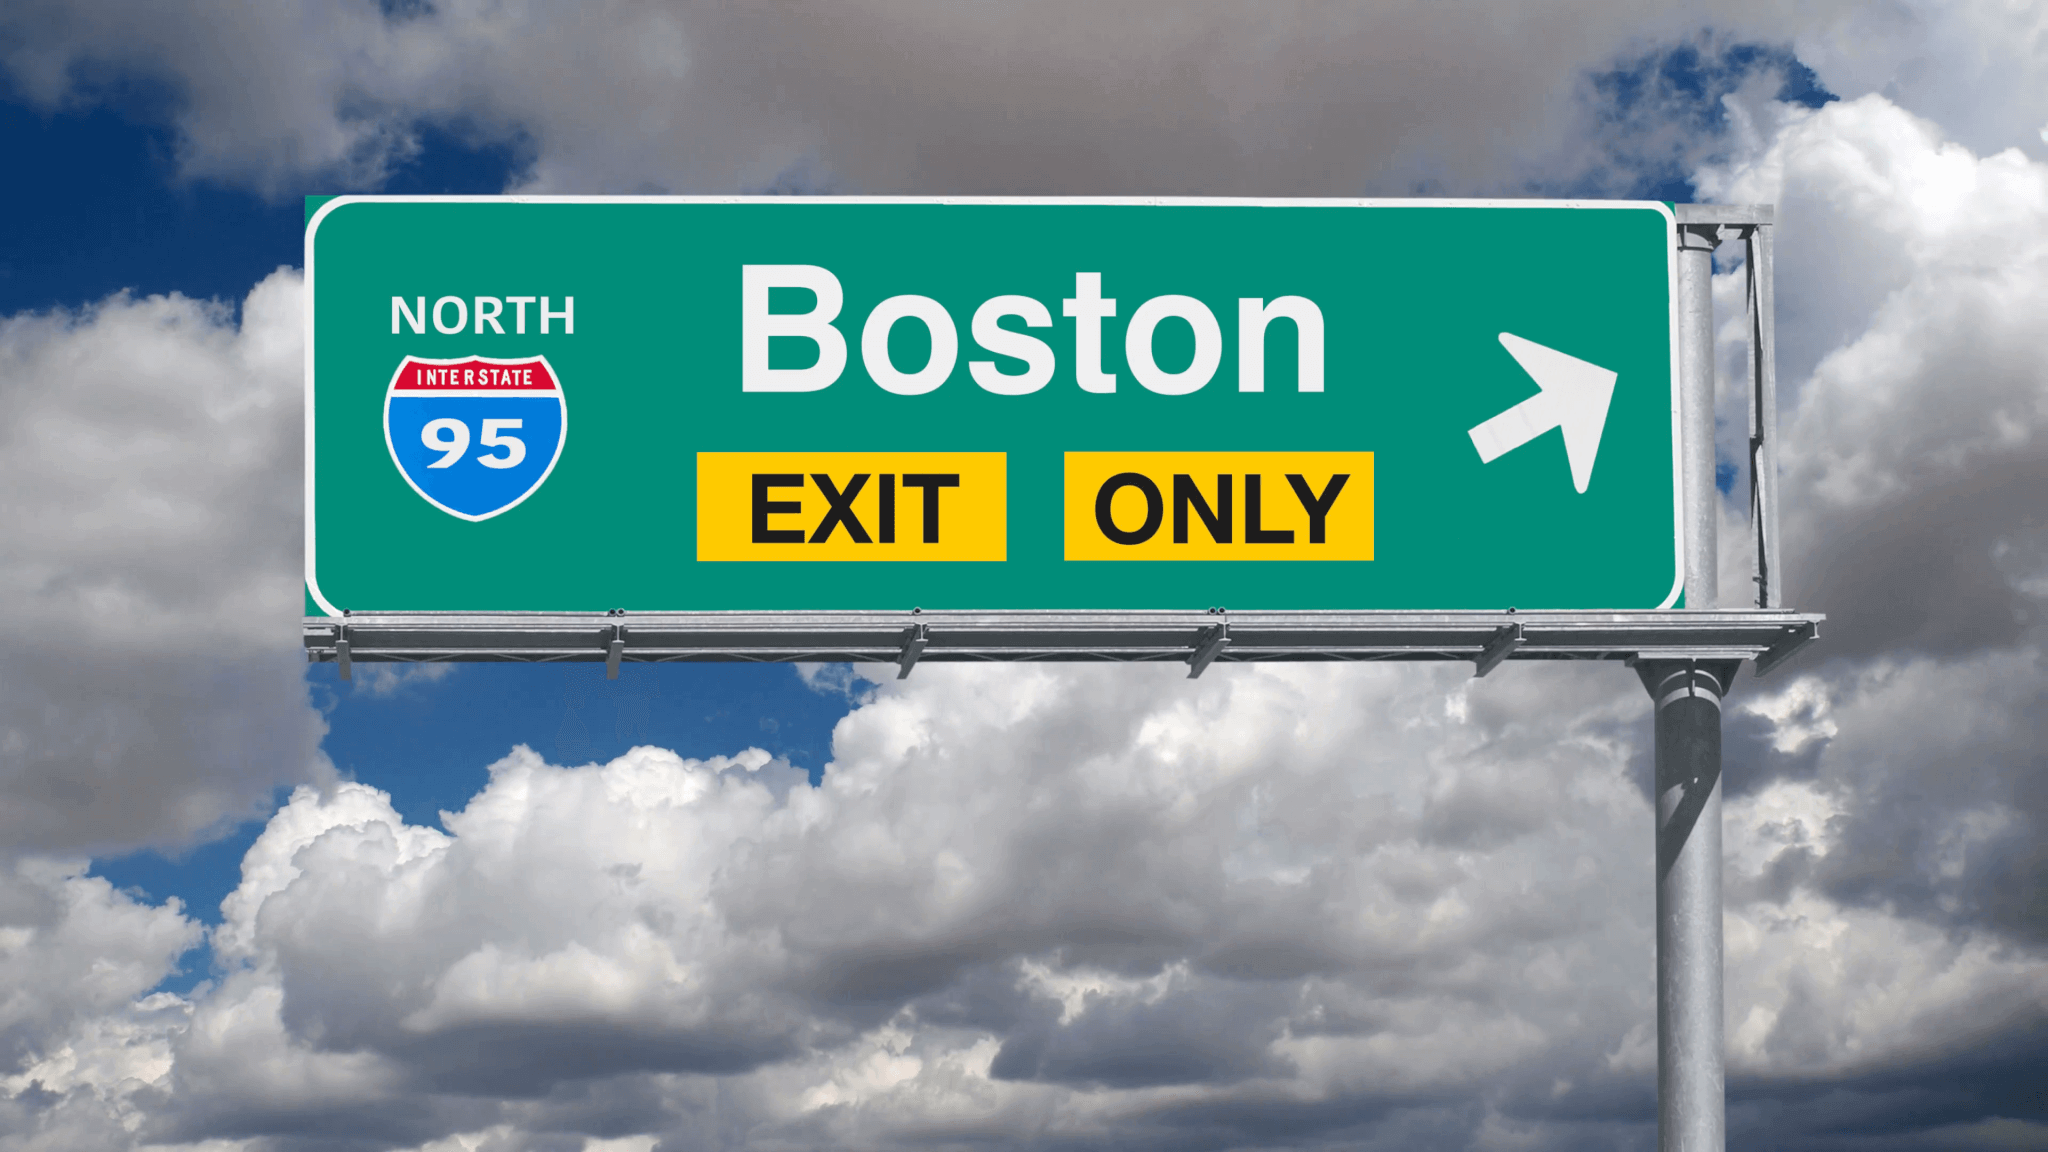 Interstate 95 is an excellent opportunity to billboard advertise in Boston as many people drive through it each day